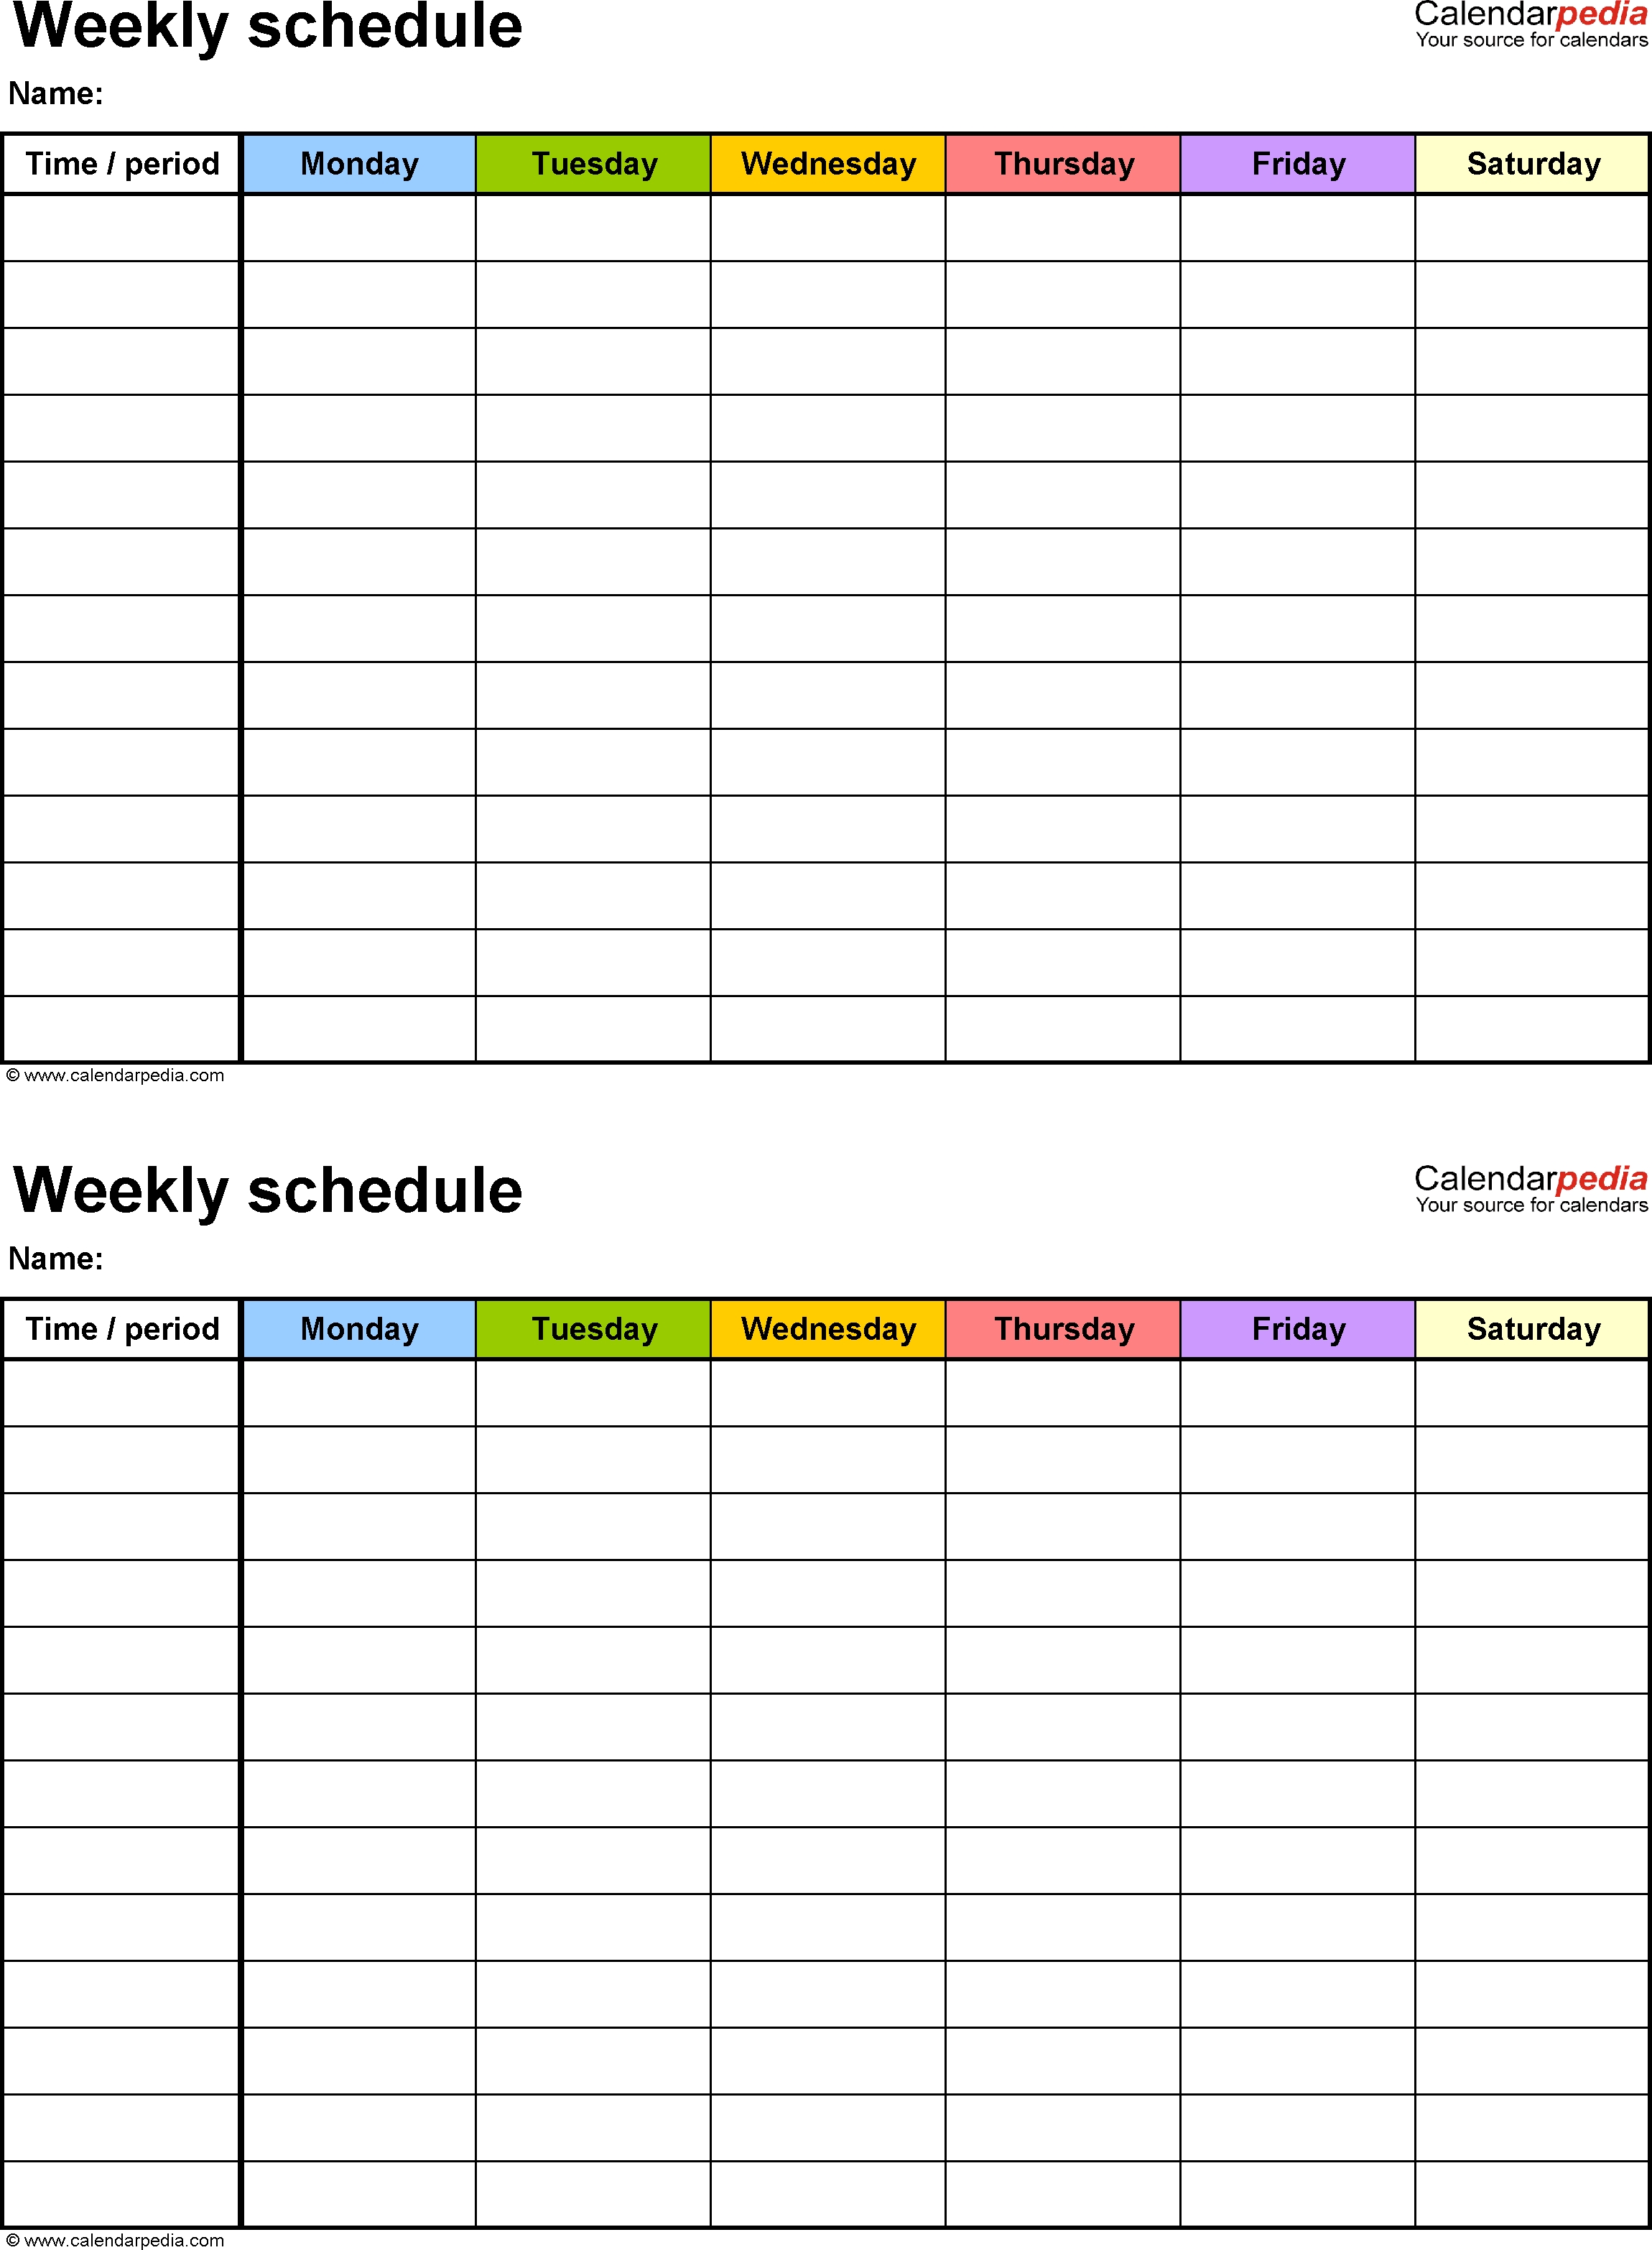 Free Weekly Schedule Templates For Pdf - 18 Templates in Monday Through Friday Planner Template